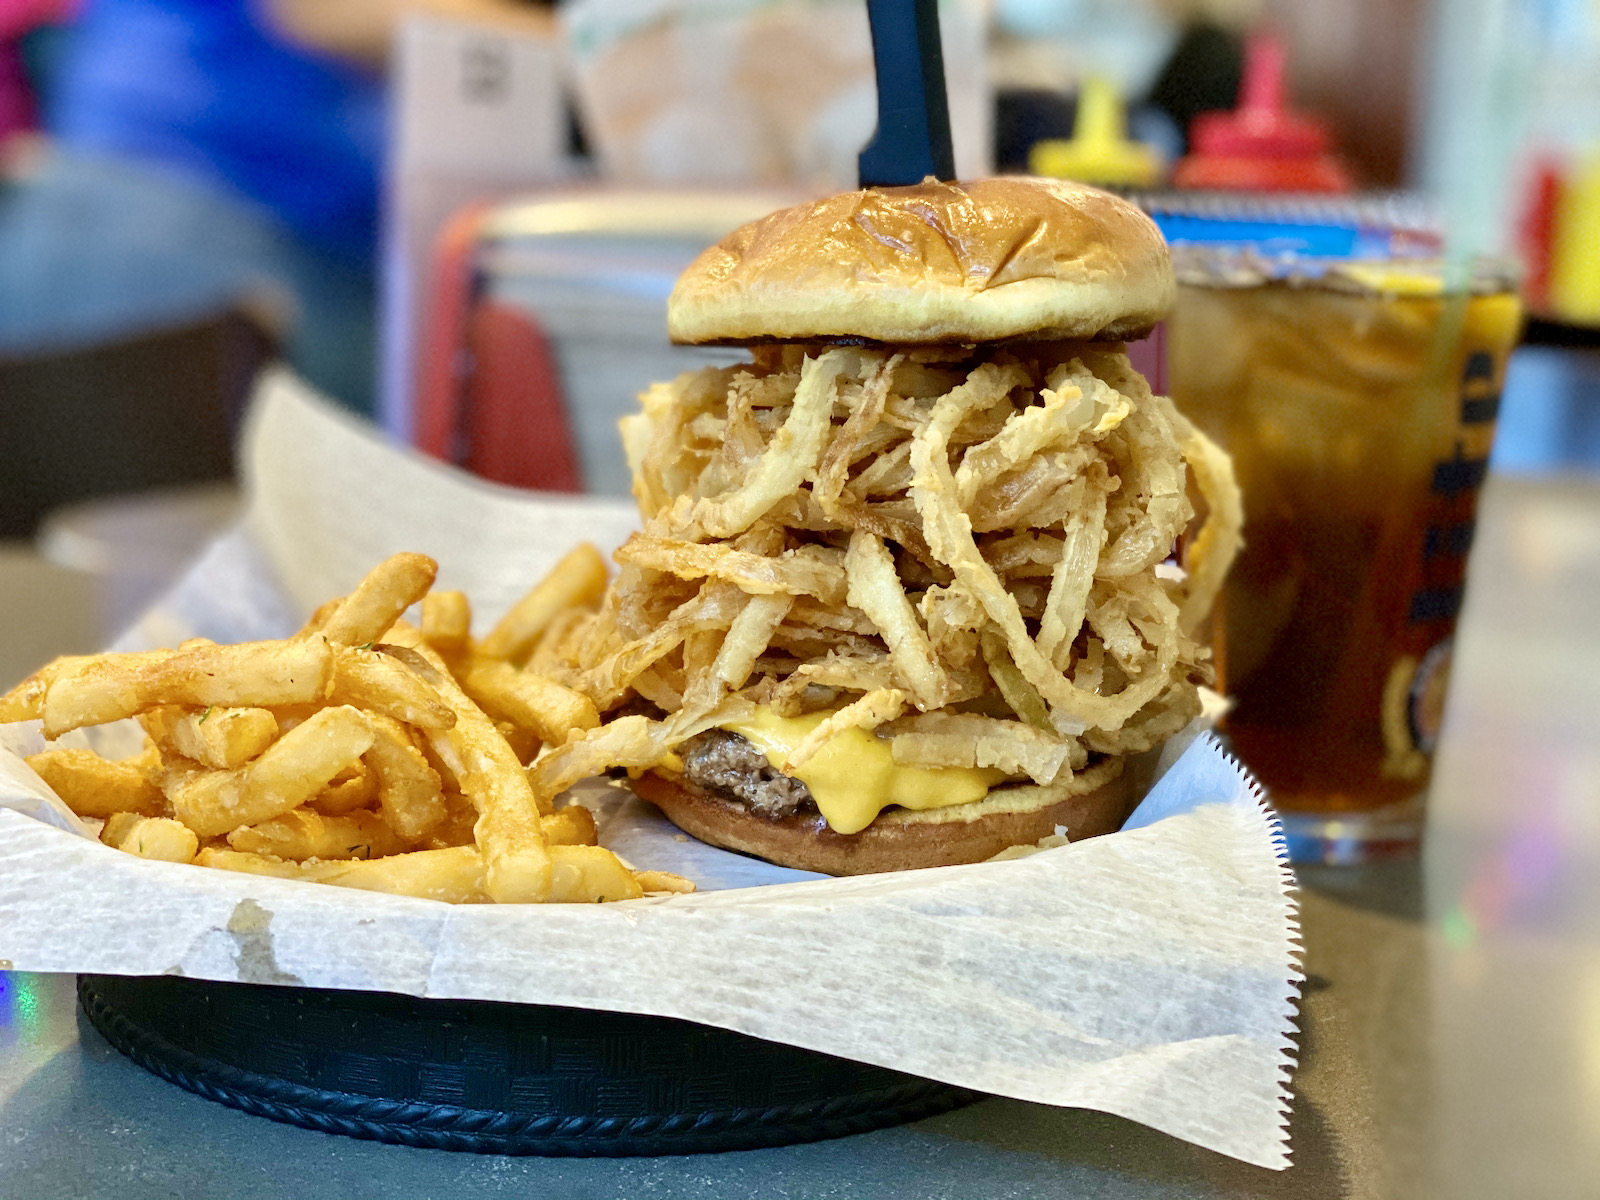 The Mean Jean burger at Fuzzy's